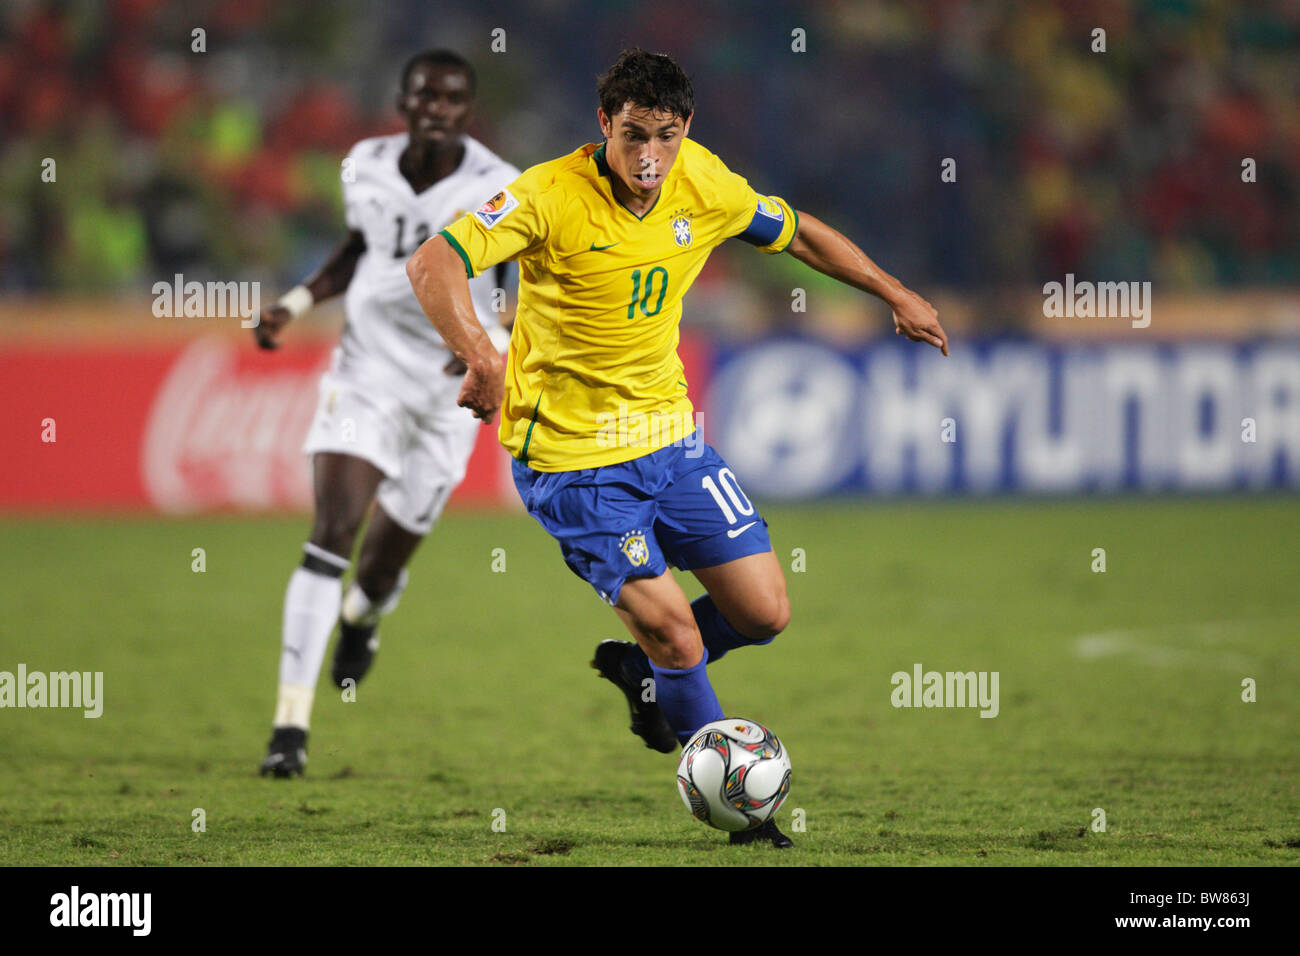 Giuliano of Brazil controls the ball during the FIFA U-20 World Cup final against Ghana October 16, 2009 Stock Photo